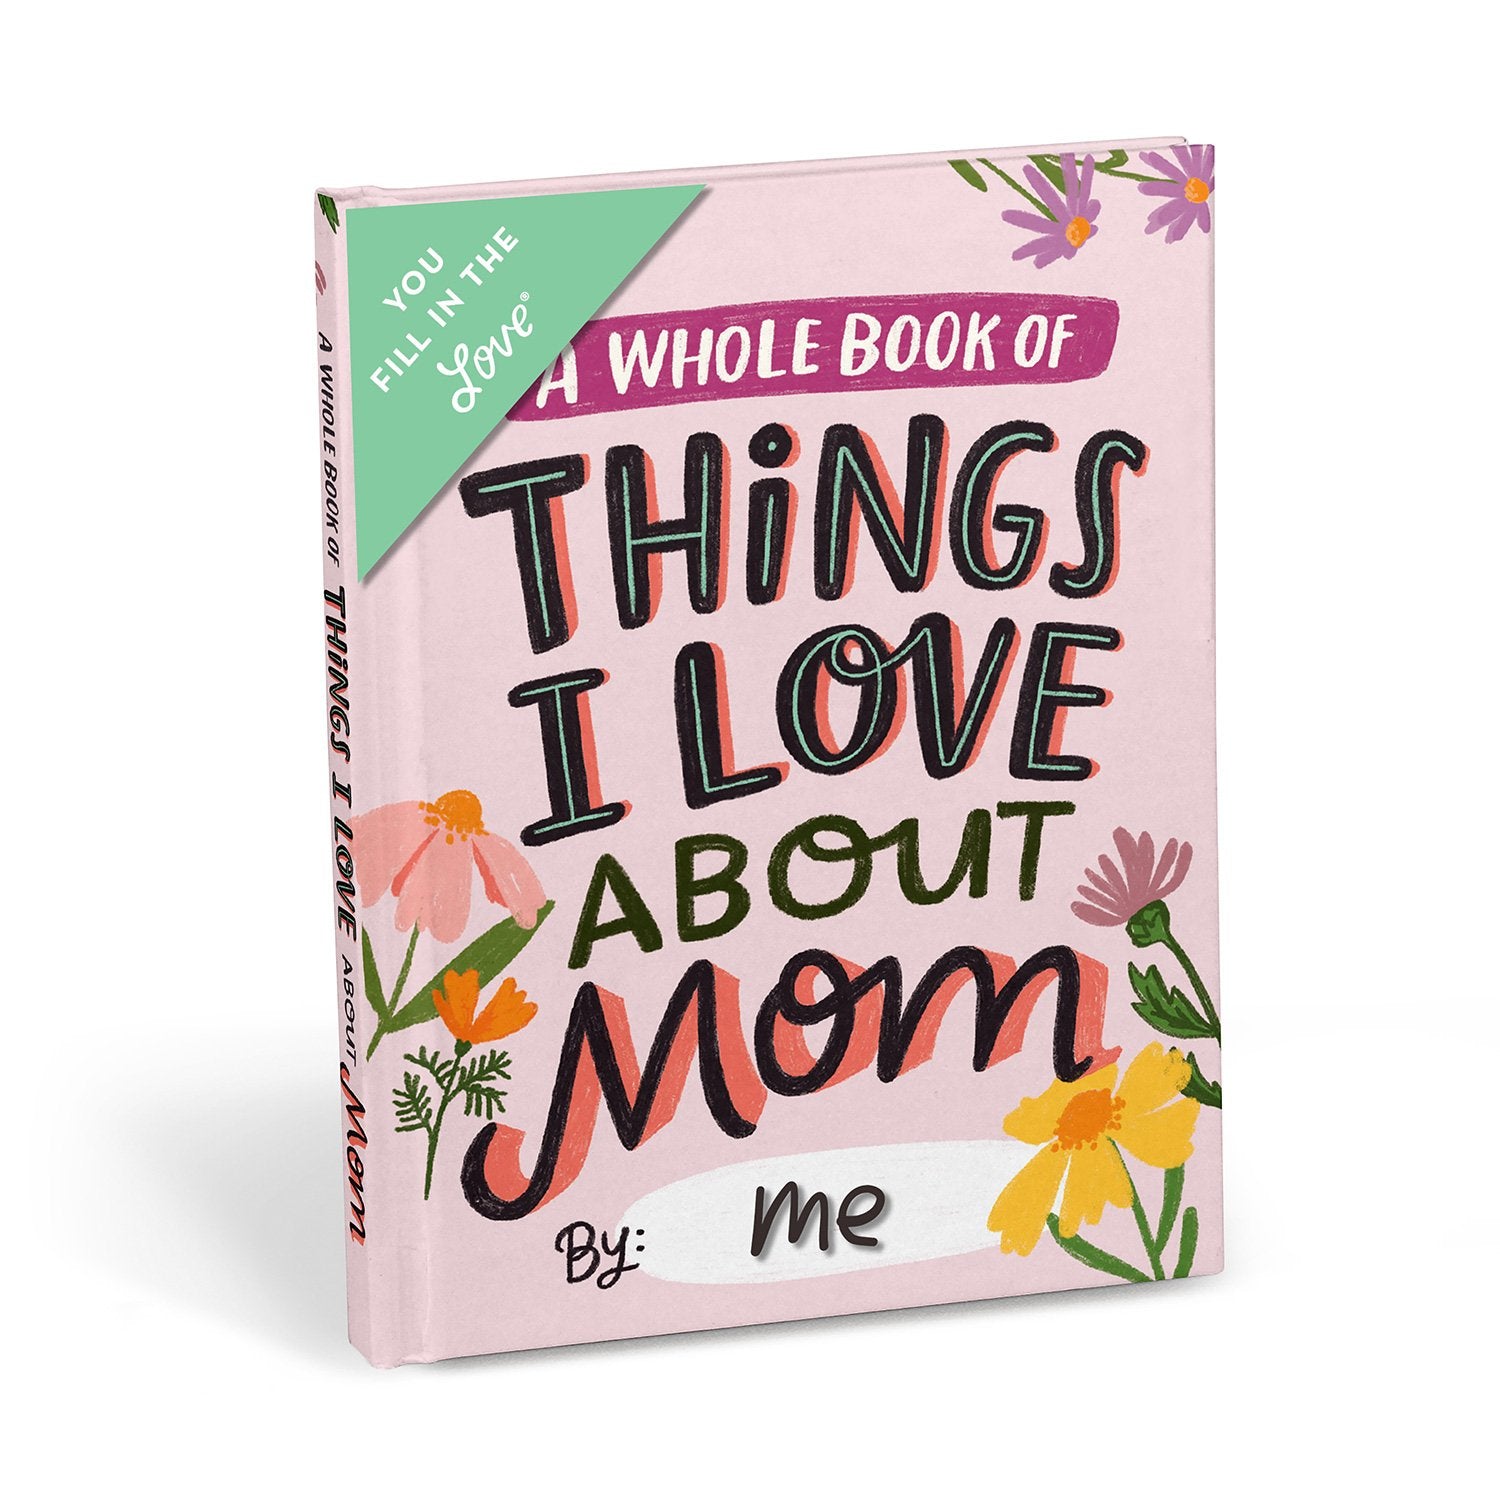 What I Love About Mom By Me Book, mother, love, prompt book